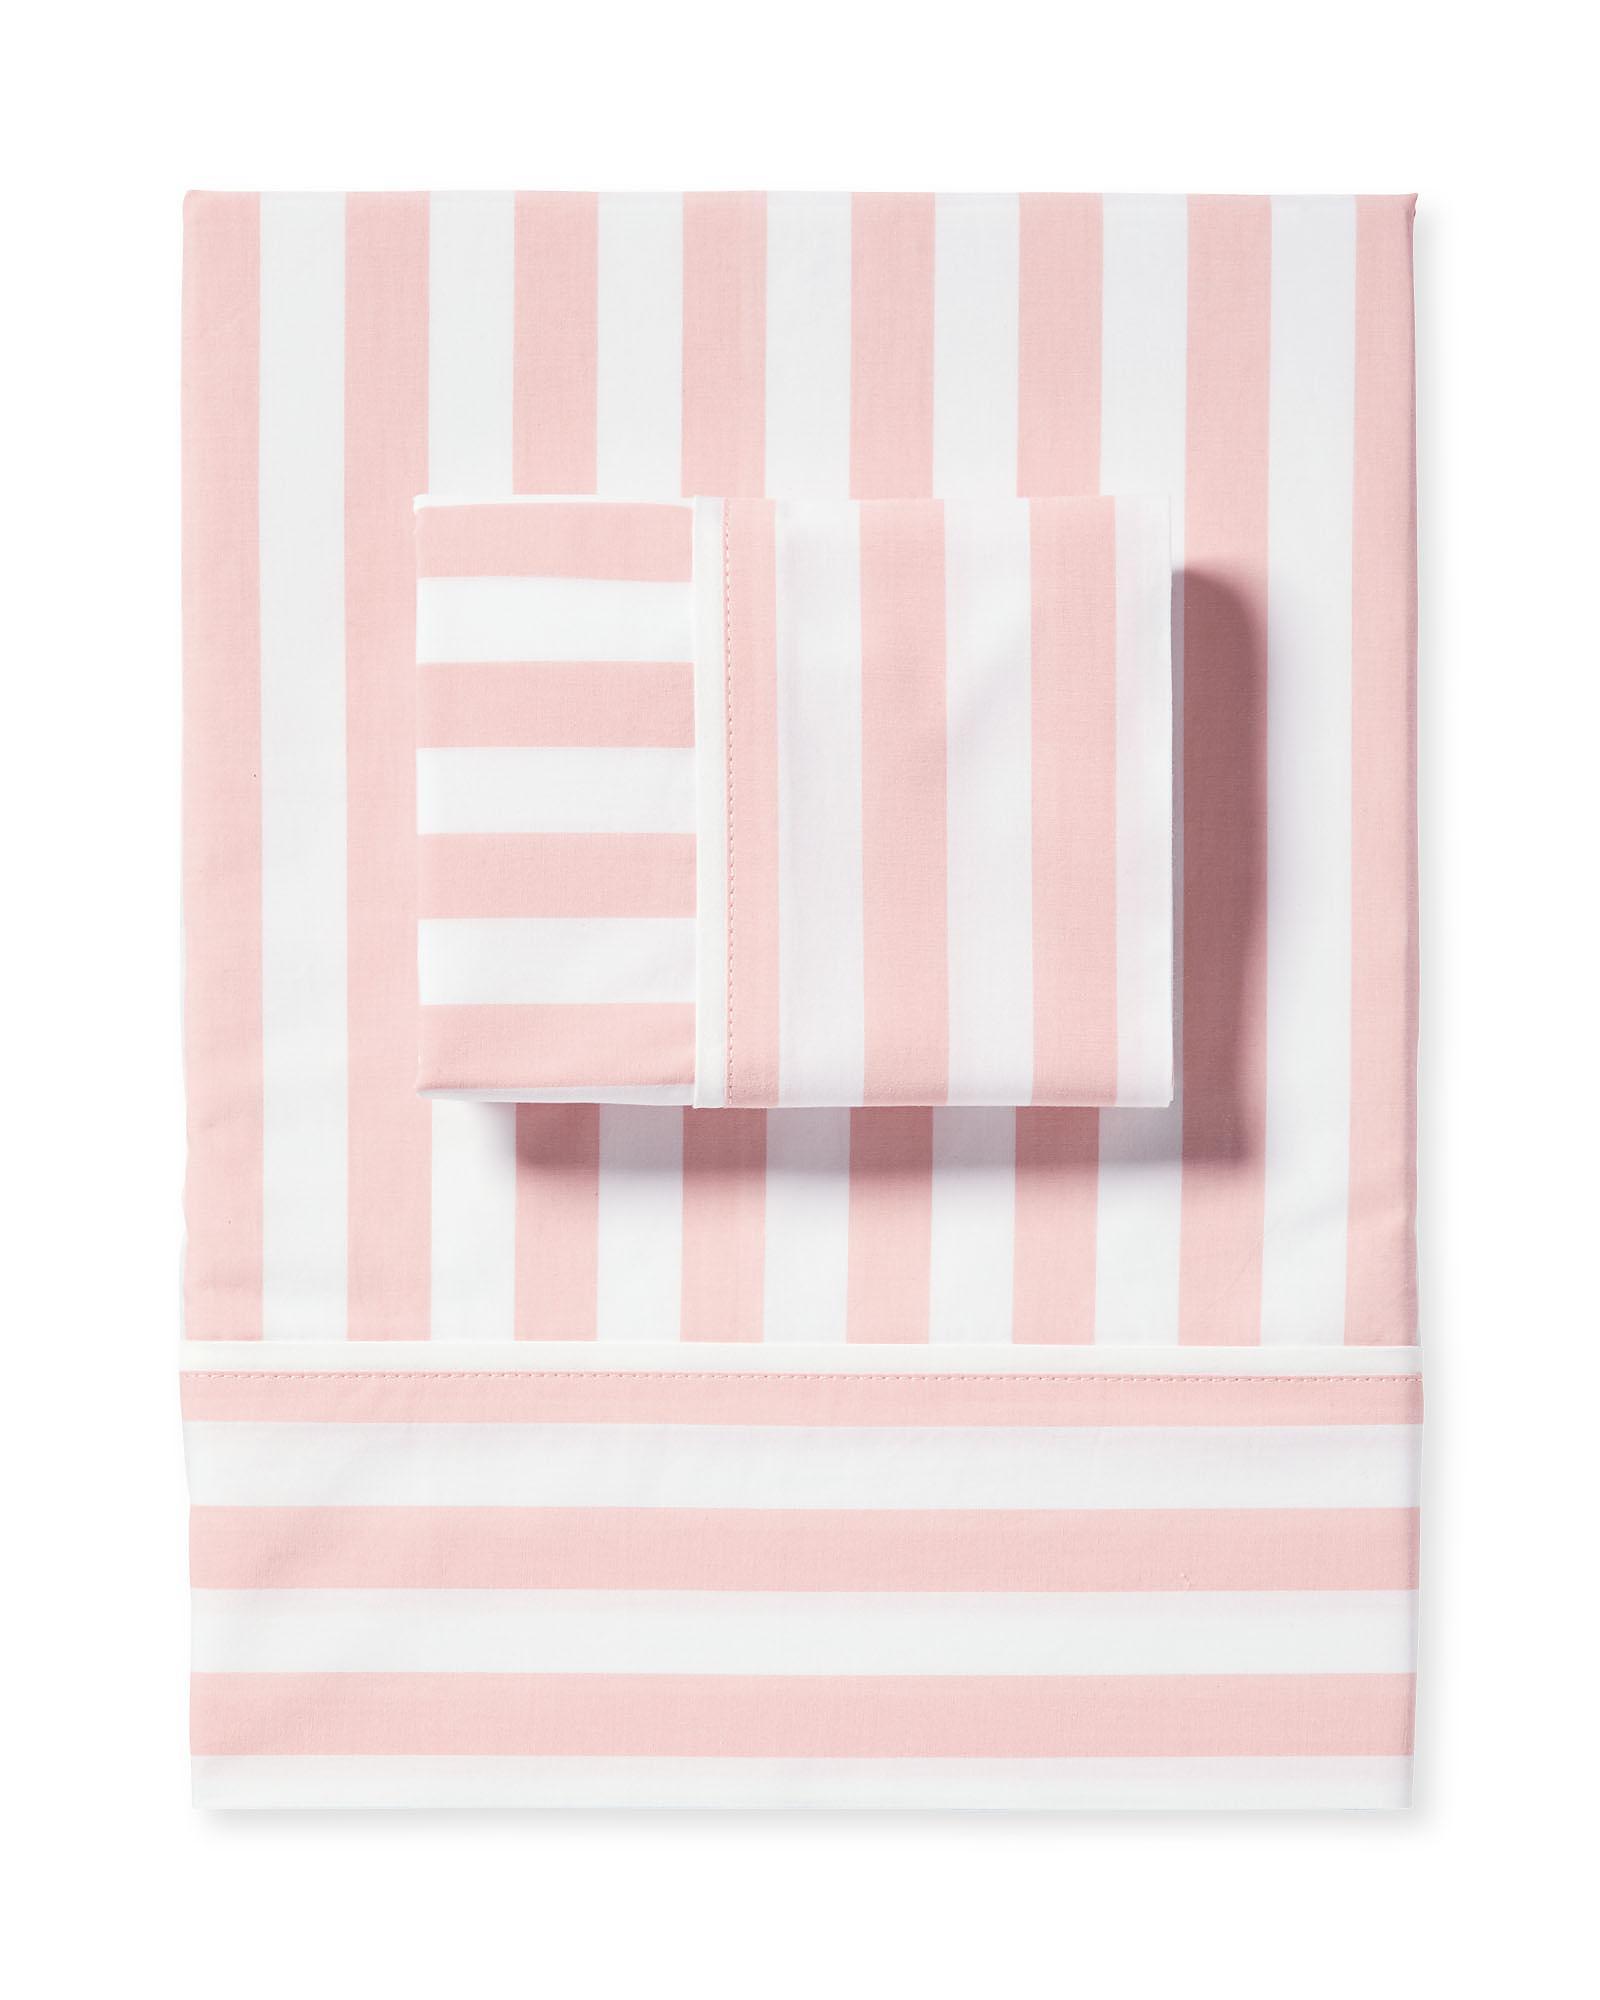 Shop Beach Club Stripe Percale Sheet Set (SERENA & LILY), Size: Queen, Color: Seashell, Quantity: 1 from Serena & Lily on Openhaus